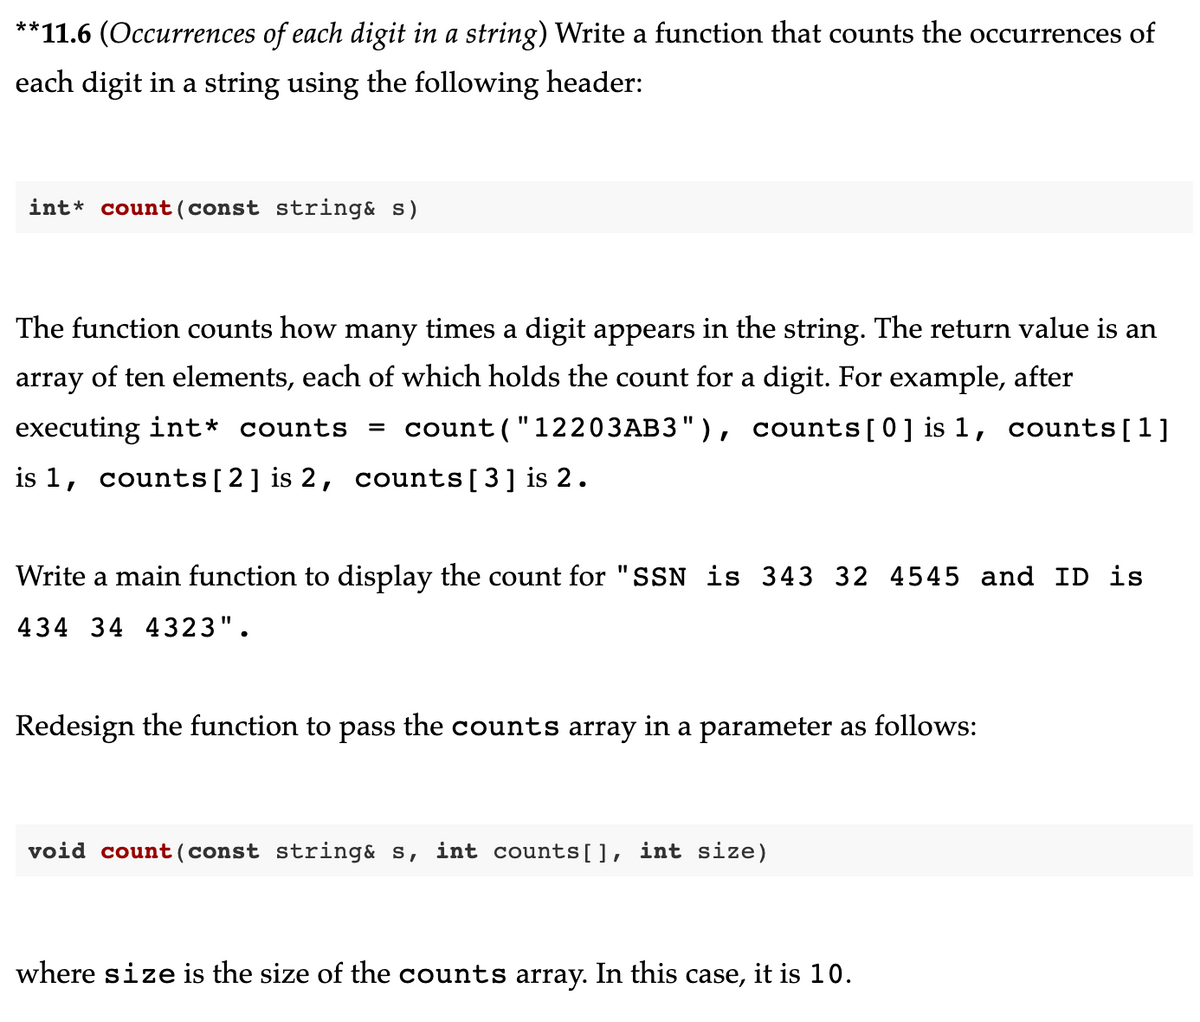 **11.6 (Occurrences of each digit in a string) Write a function that counts the occurrences of
each digit in a string using the following header:
int count (const string& s)
The function counts how many times a digit appears in the string. The return value is an
array of ten elements, each of which holds the count for a digit. For example, after
executing int* counts = count("12203AB3"), counts[0] is 1, counts[1]
is 1, counts [2] is 2, counts [3] is 2.
Write a main function to display the count for "SSN is 343 32 4545 and ID is
434 34 4323".
Redesign the function to pass the counts array in a parameter as follows:
void count (const string& s, int counts[], int size)
where size is the size of the counts array. In this case, it is 10.